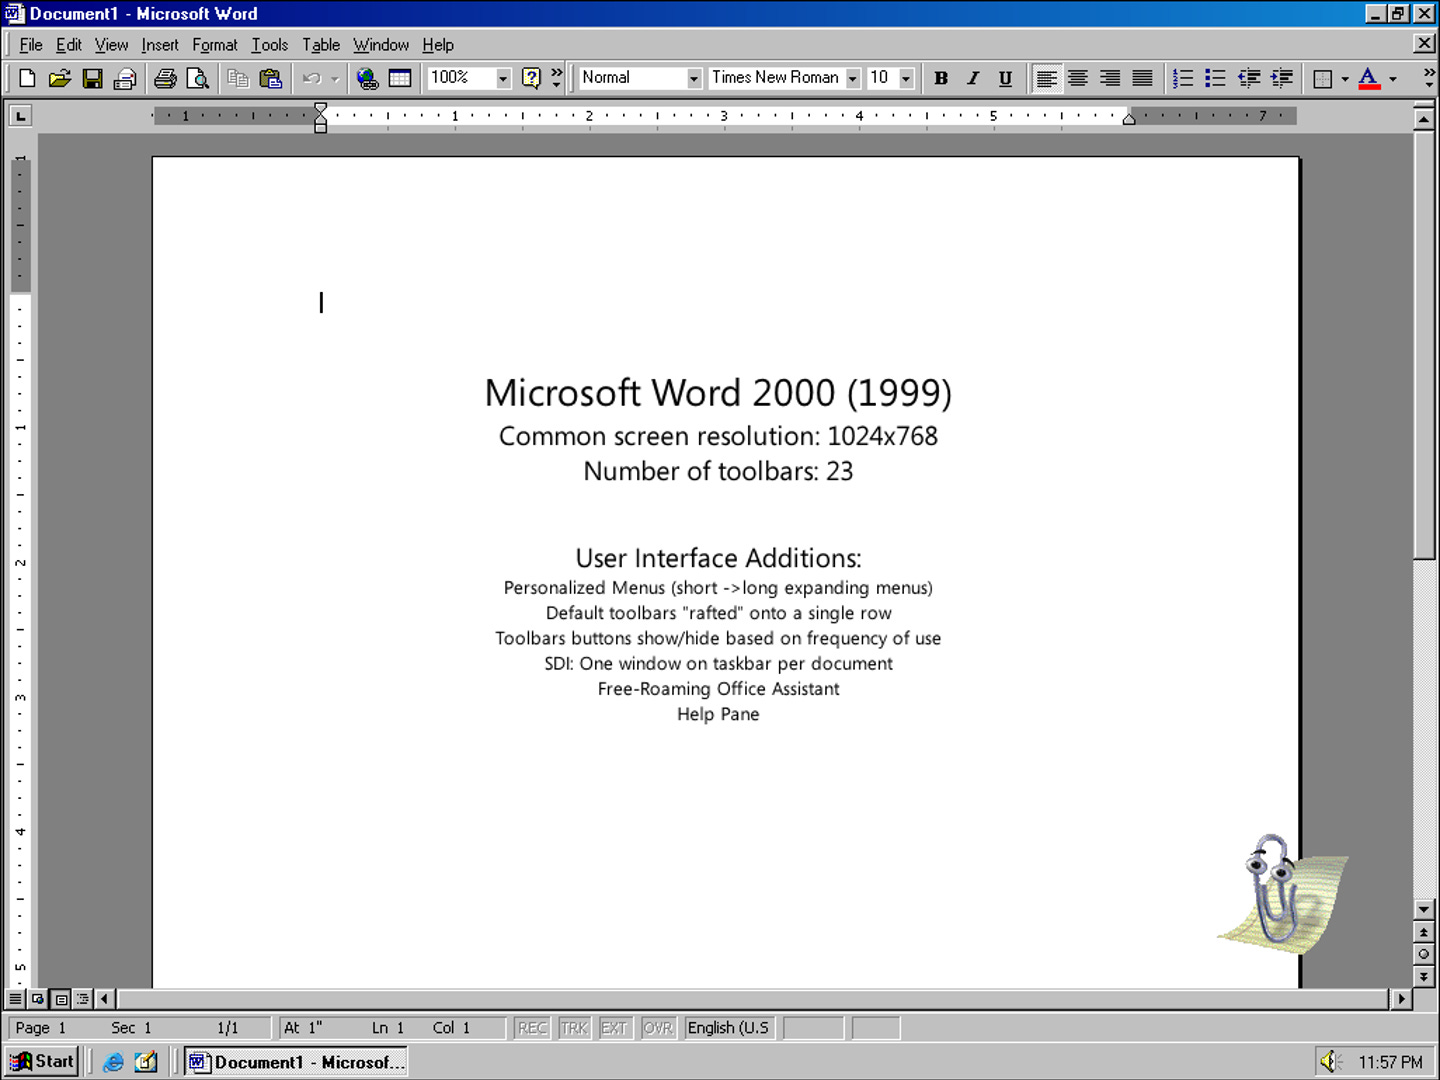 Microsoft Word 2000 (1999) Common screen resolution: 1024x768 Number of toolbars: 23 User Interface Additions: Personalized Menus (short ->long expanding menus) Default toolbars "rafted" onto a single row Toolbars buttons show/hide based on frequency of use SDI: One window on taskbar per document Free-Roaming Office Assistant Helo Pane